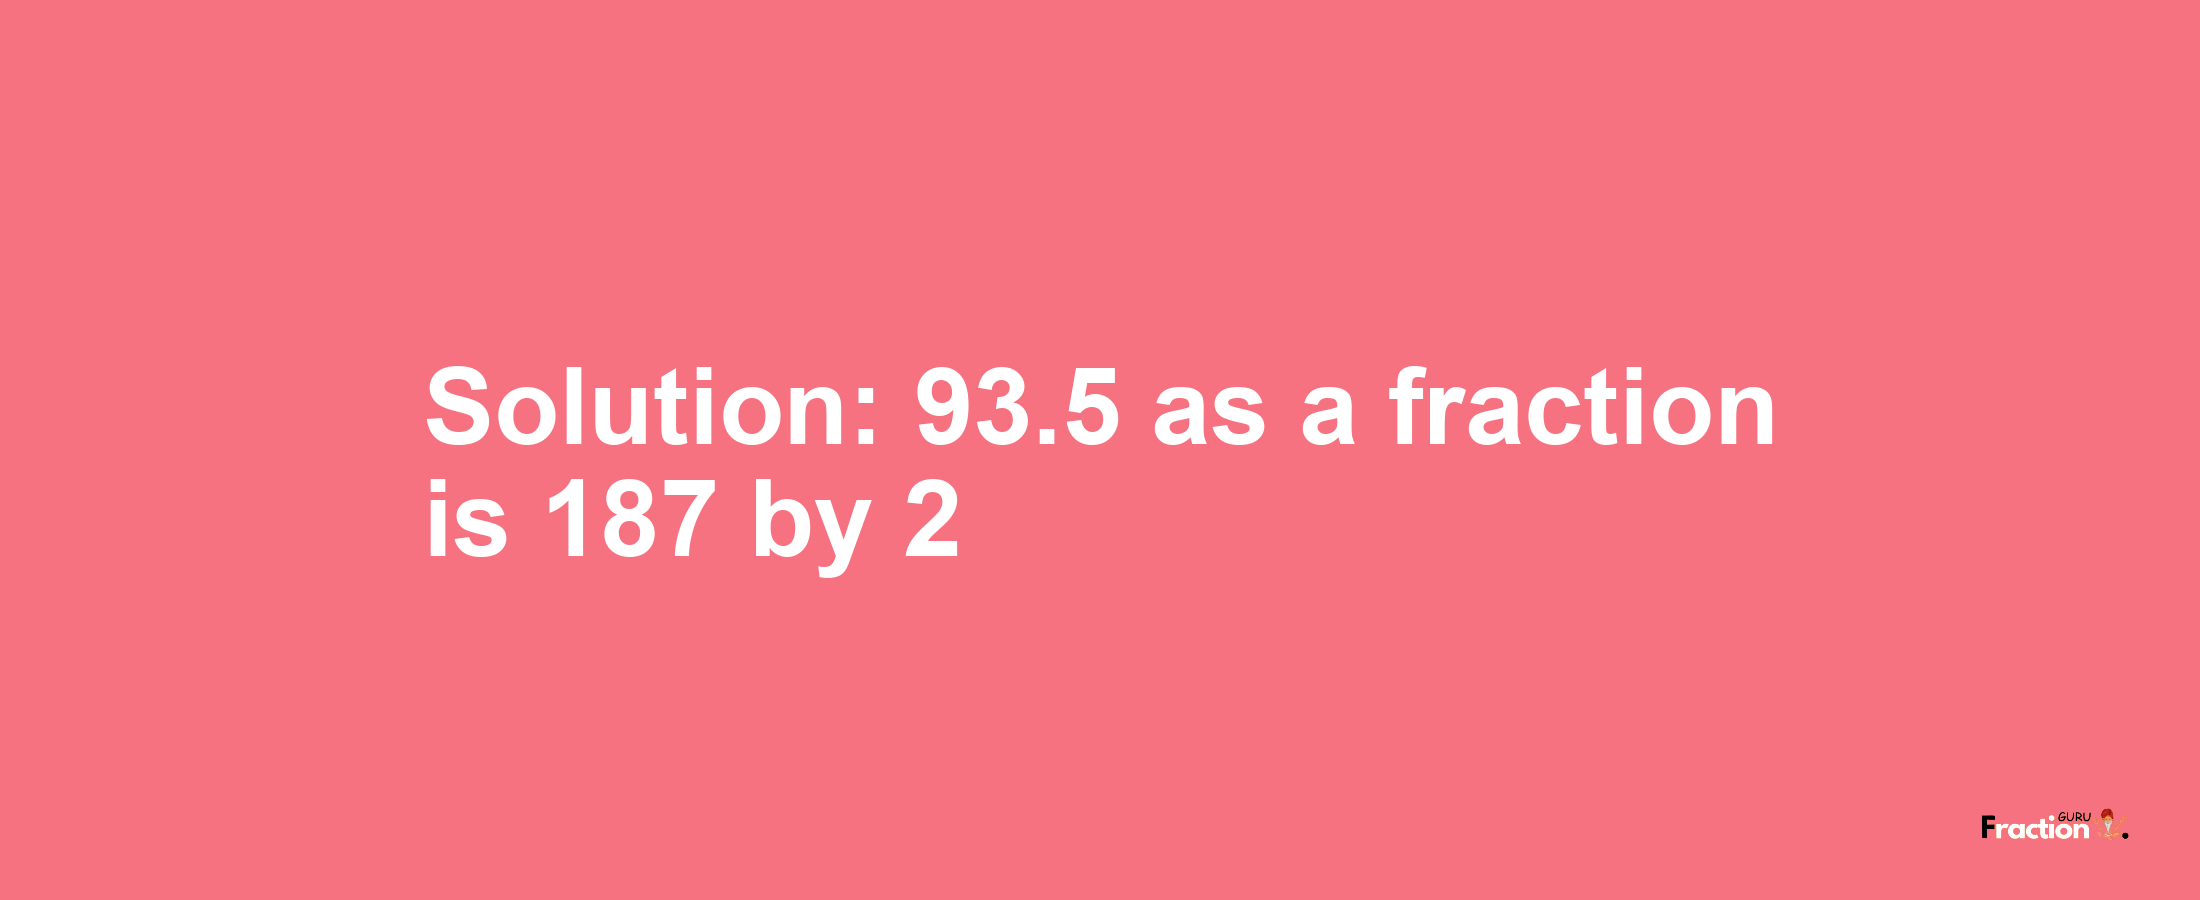 Solution:93.5 as a fraction is 187/2